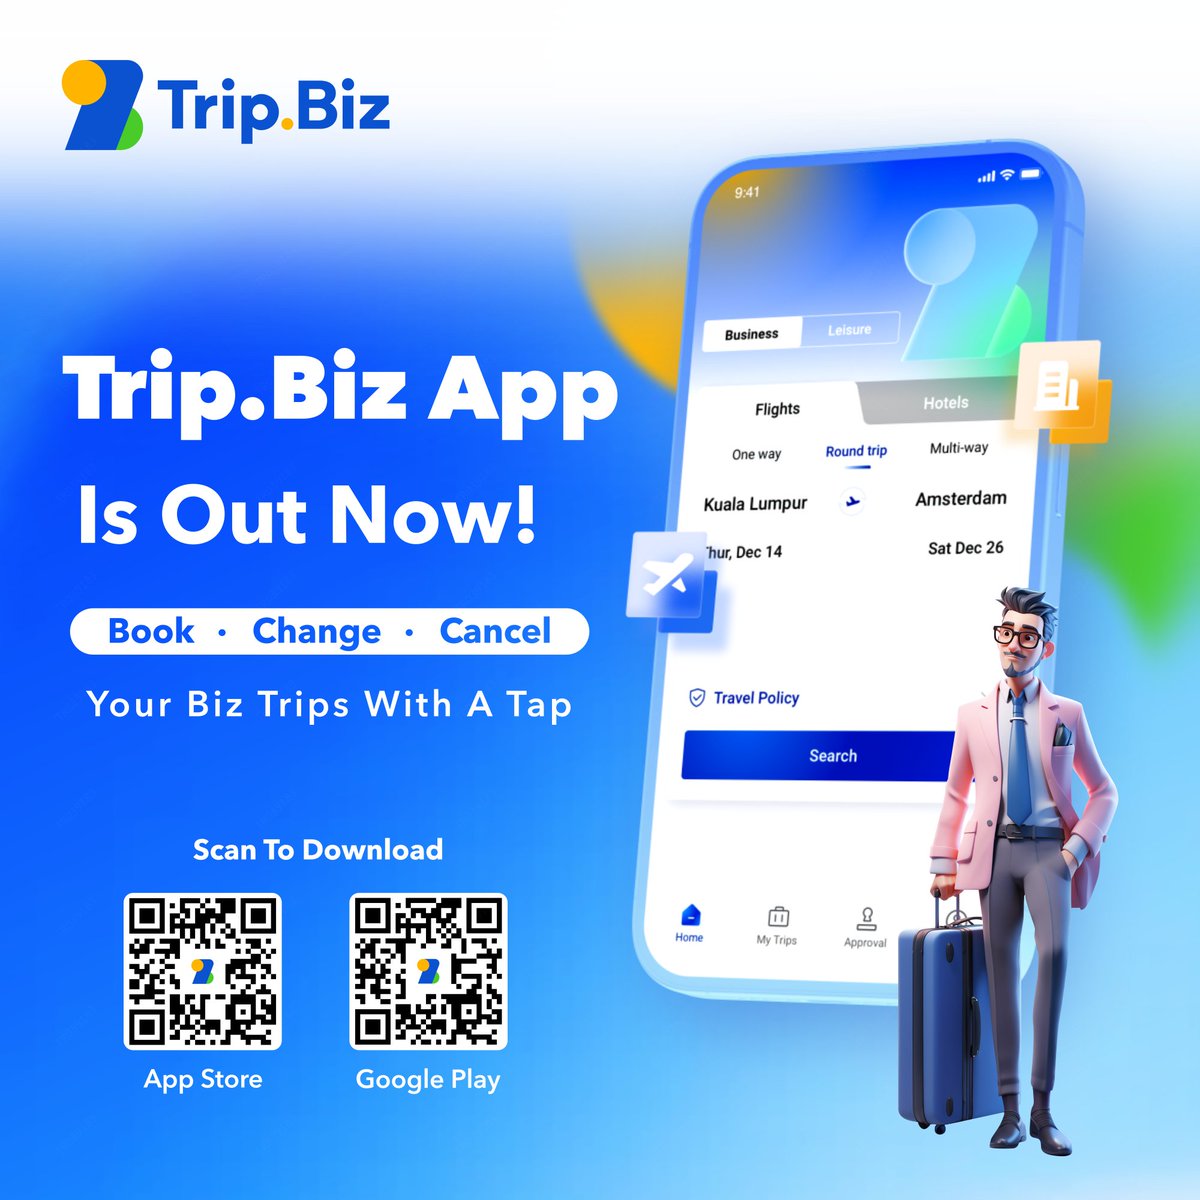 Have you downloaded the Trip.Biz app yet❓Flexible bookings, approval, data management, and more are at your fingertips. 📱

It’s a new day for business travel management efficiency with Trip.Biz.

#TripBiz #CorporateTravel #BusinessTravel #AppLaunch